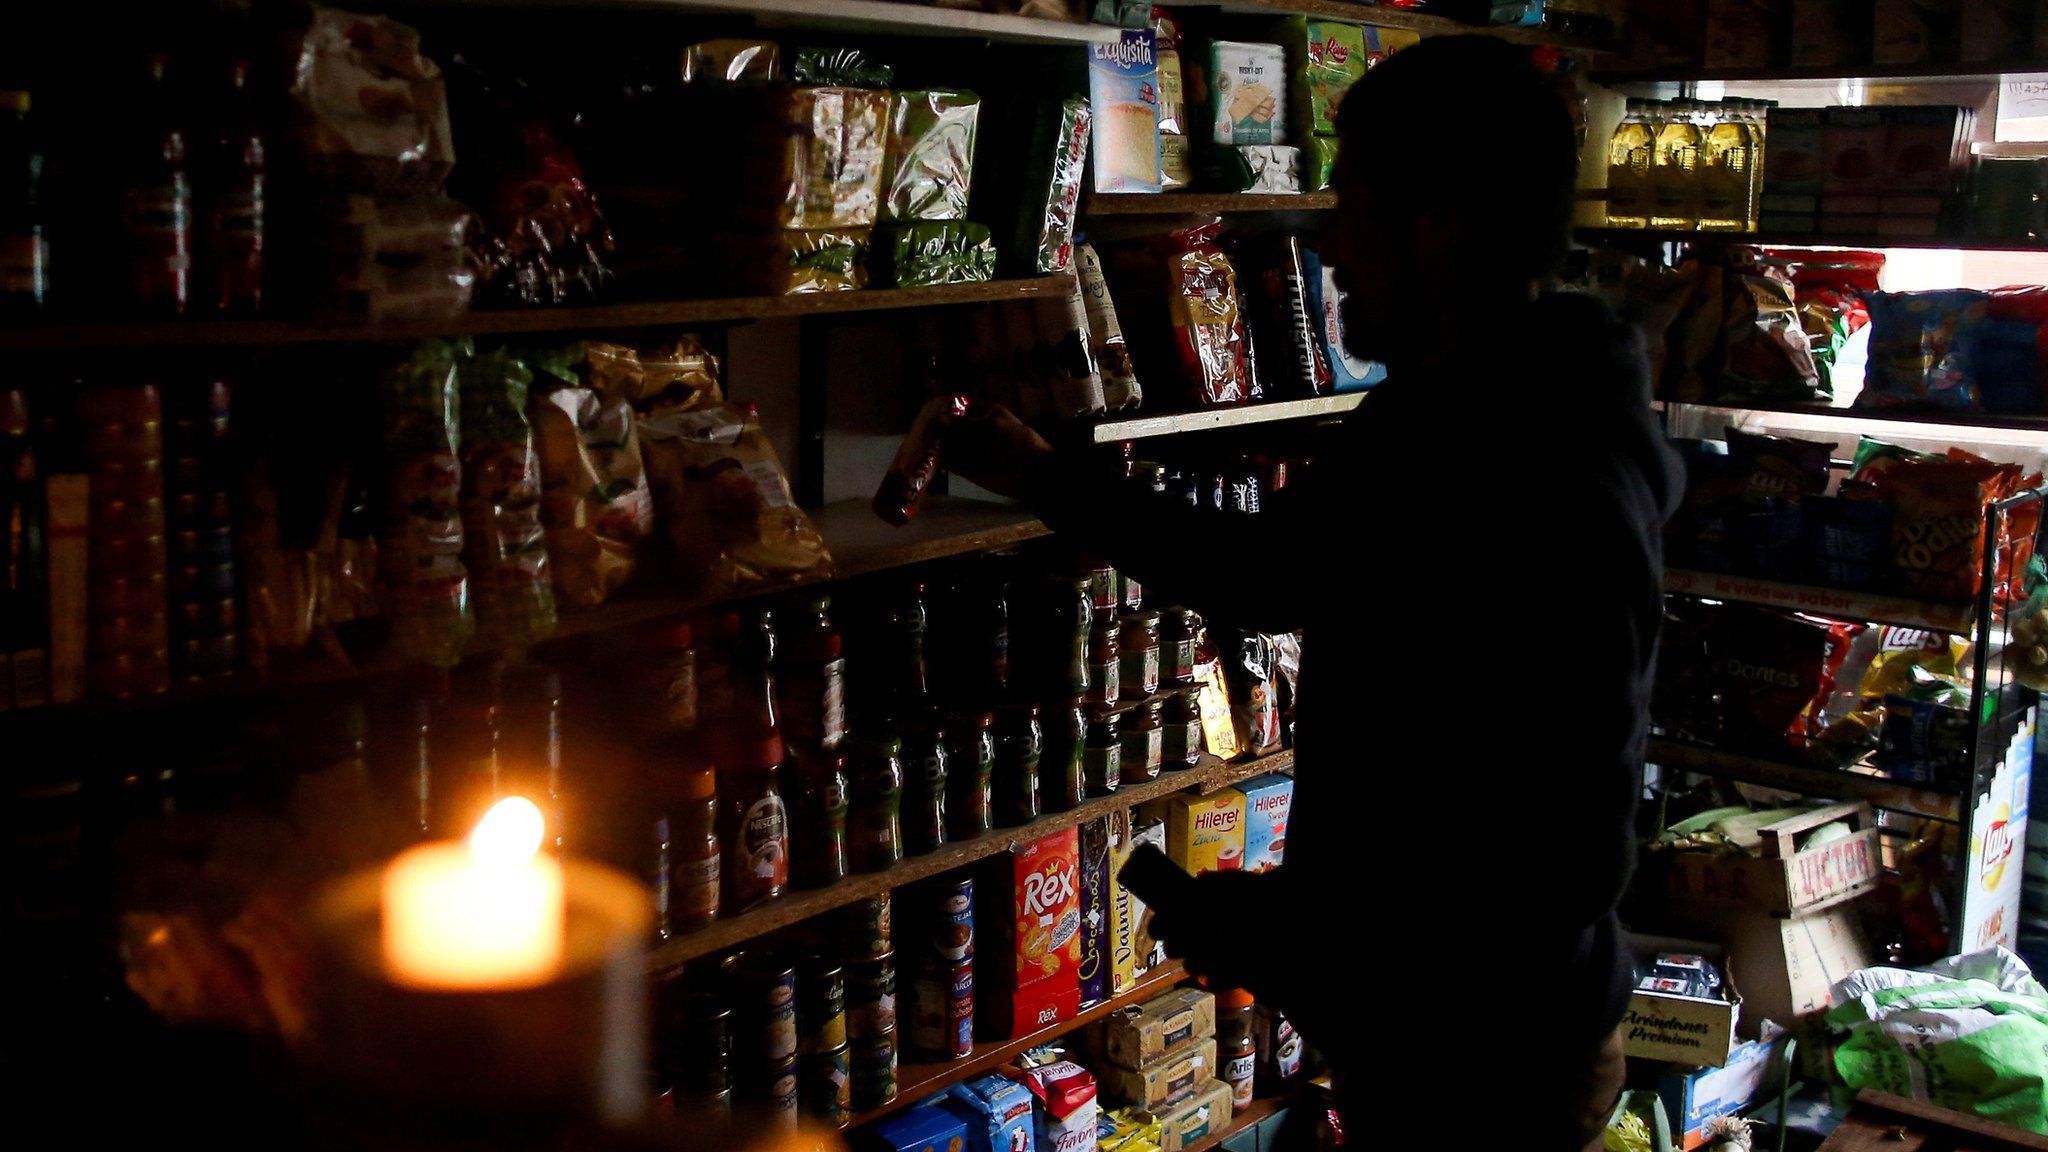 A shop vendor works by candlelight in Buenos Aires, Argentina